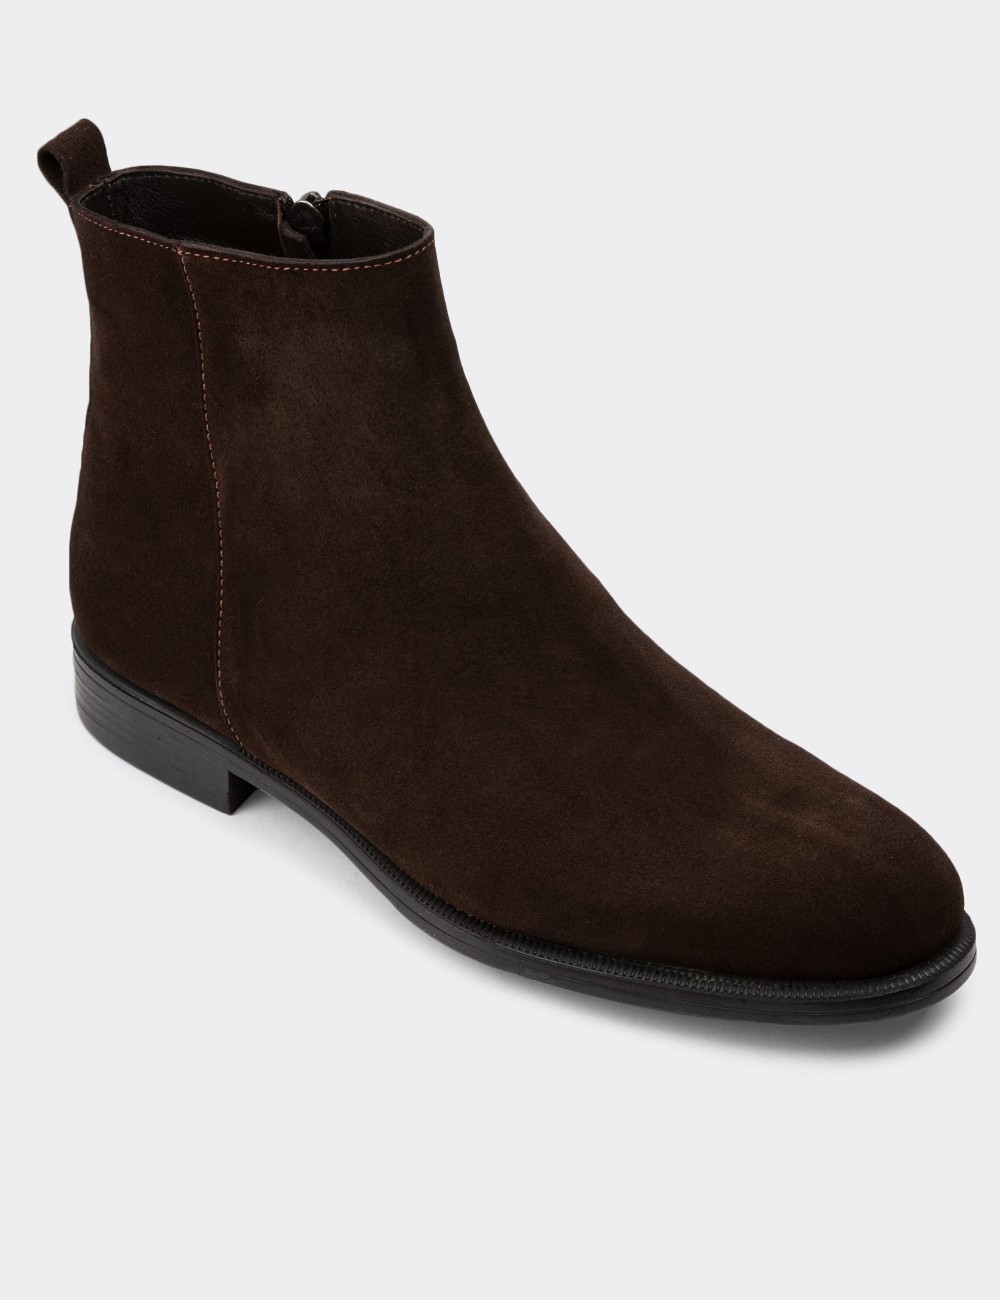 Brown Suede Leather Boots - 01921MKHVC02